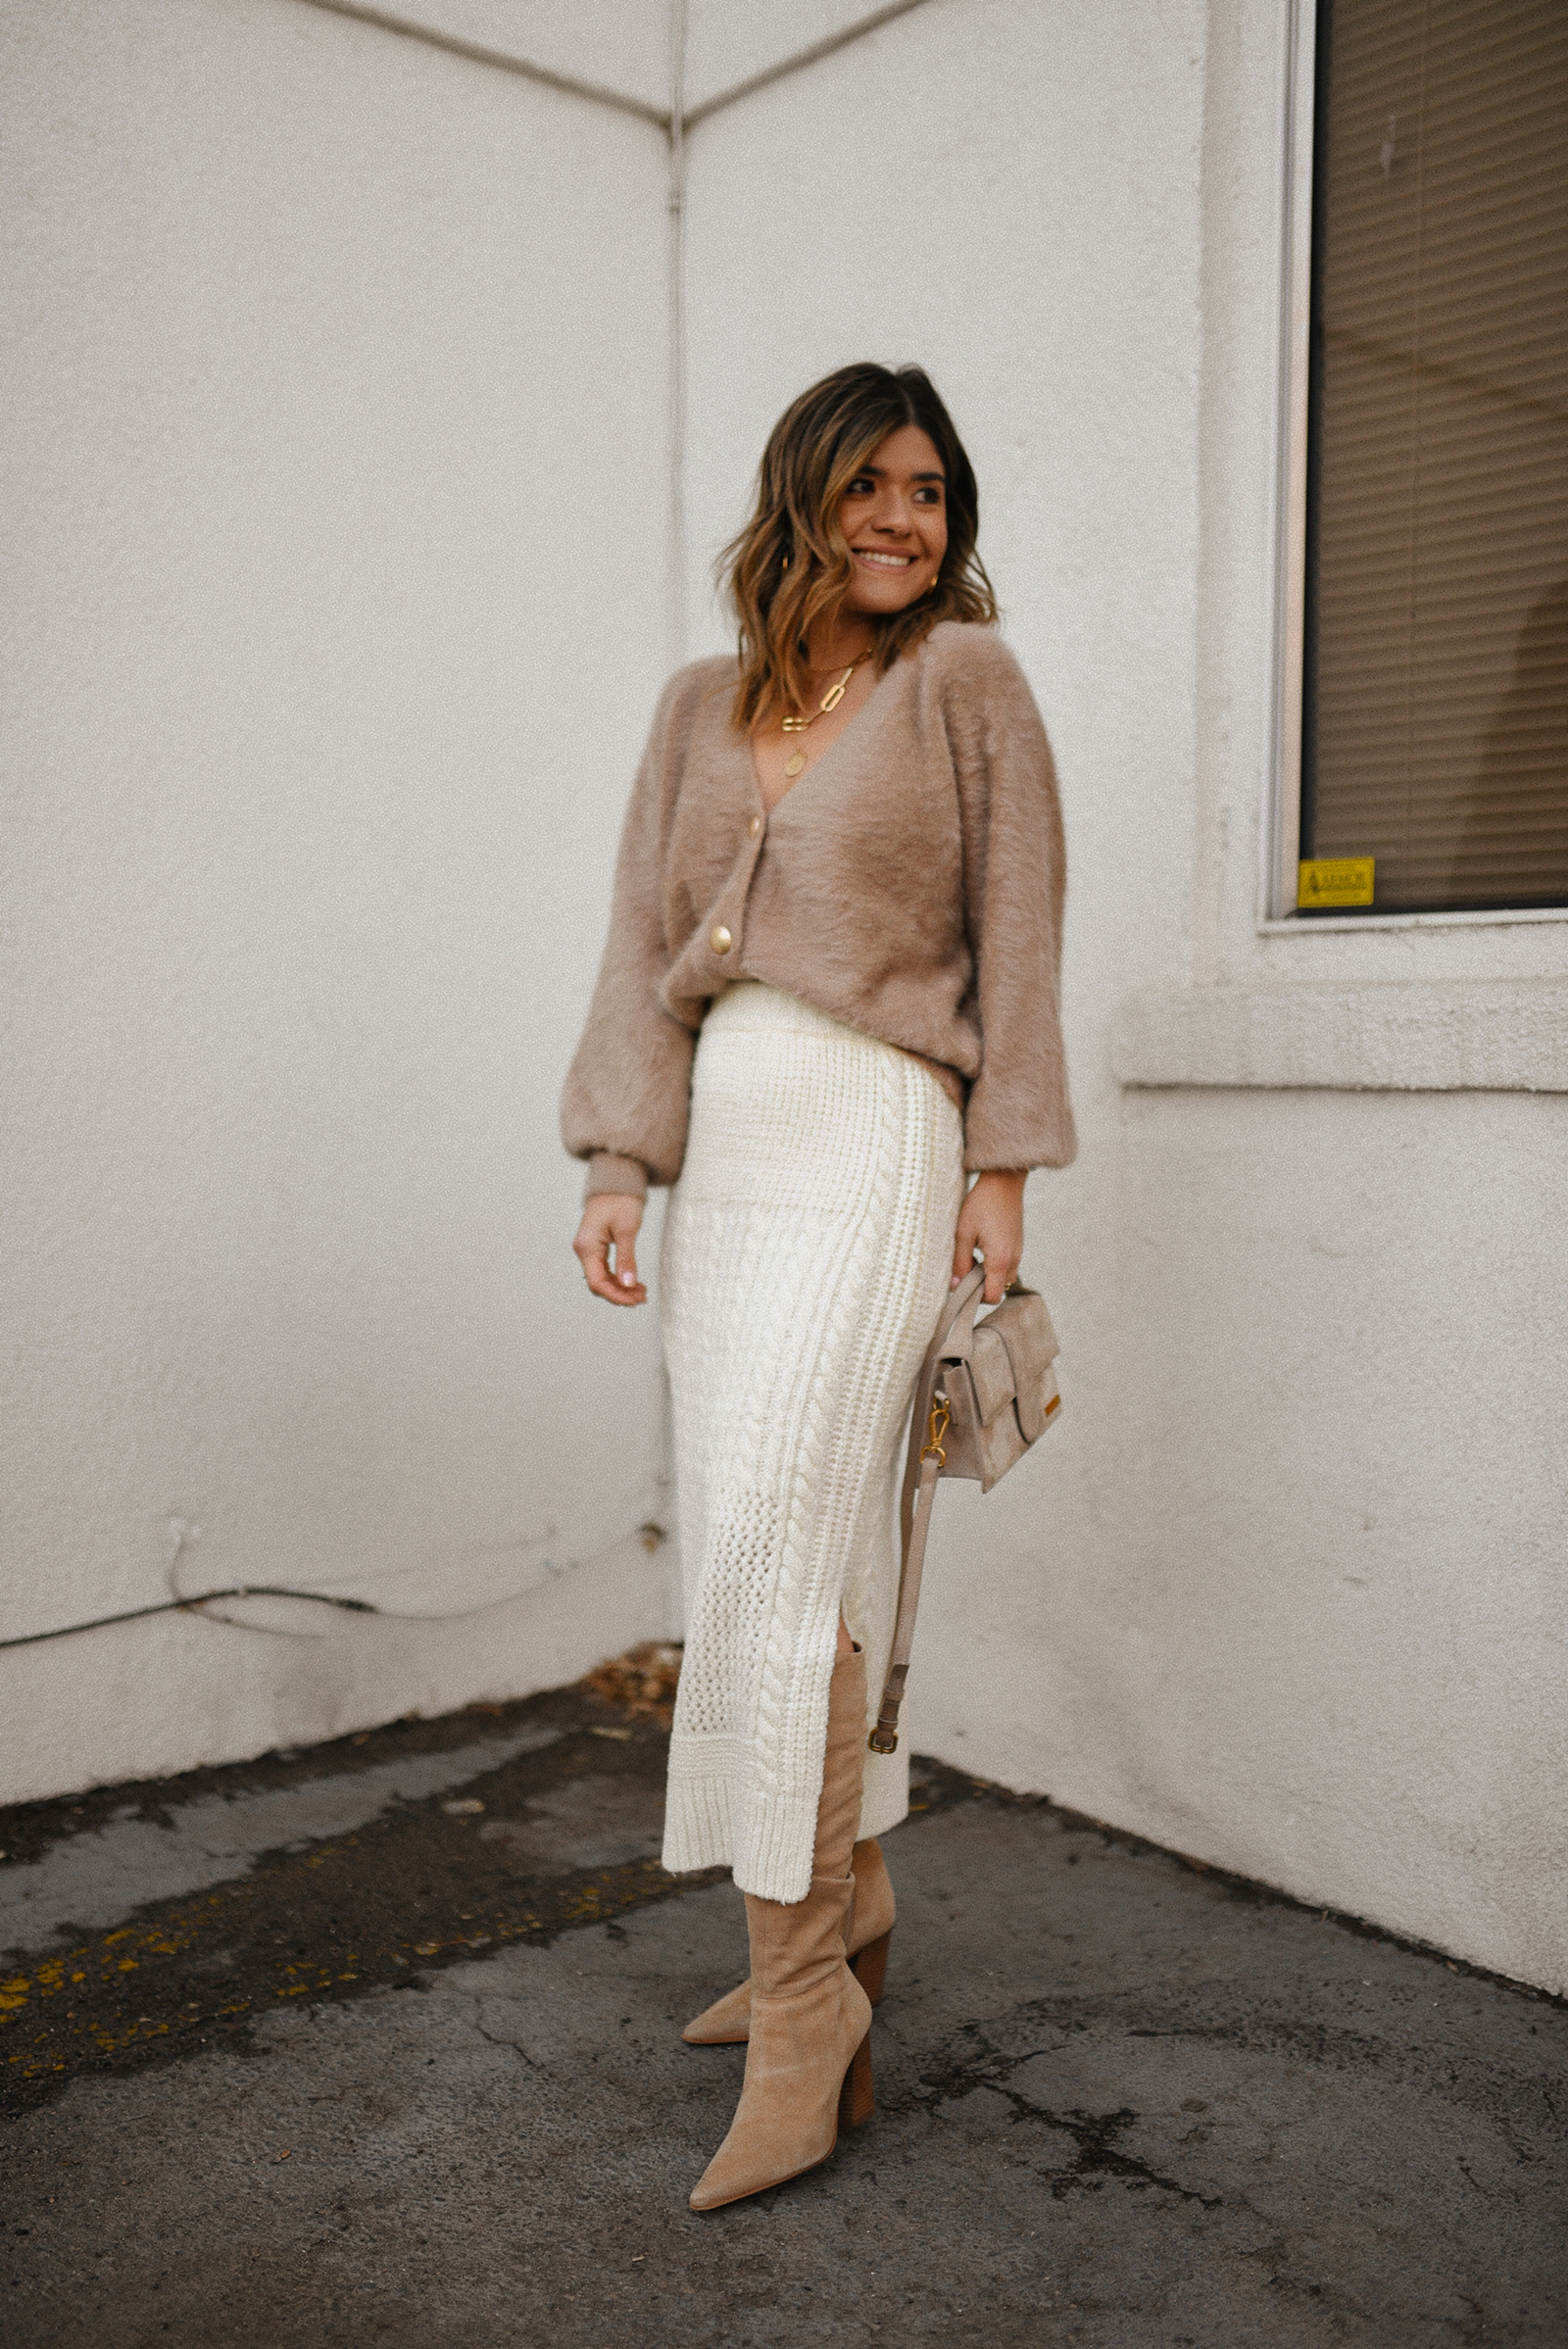 Fall Neutrals Outfit - Classy Yet Trendy